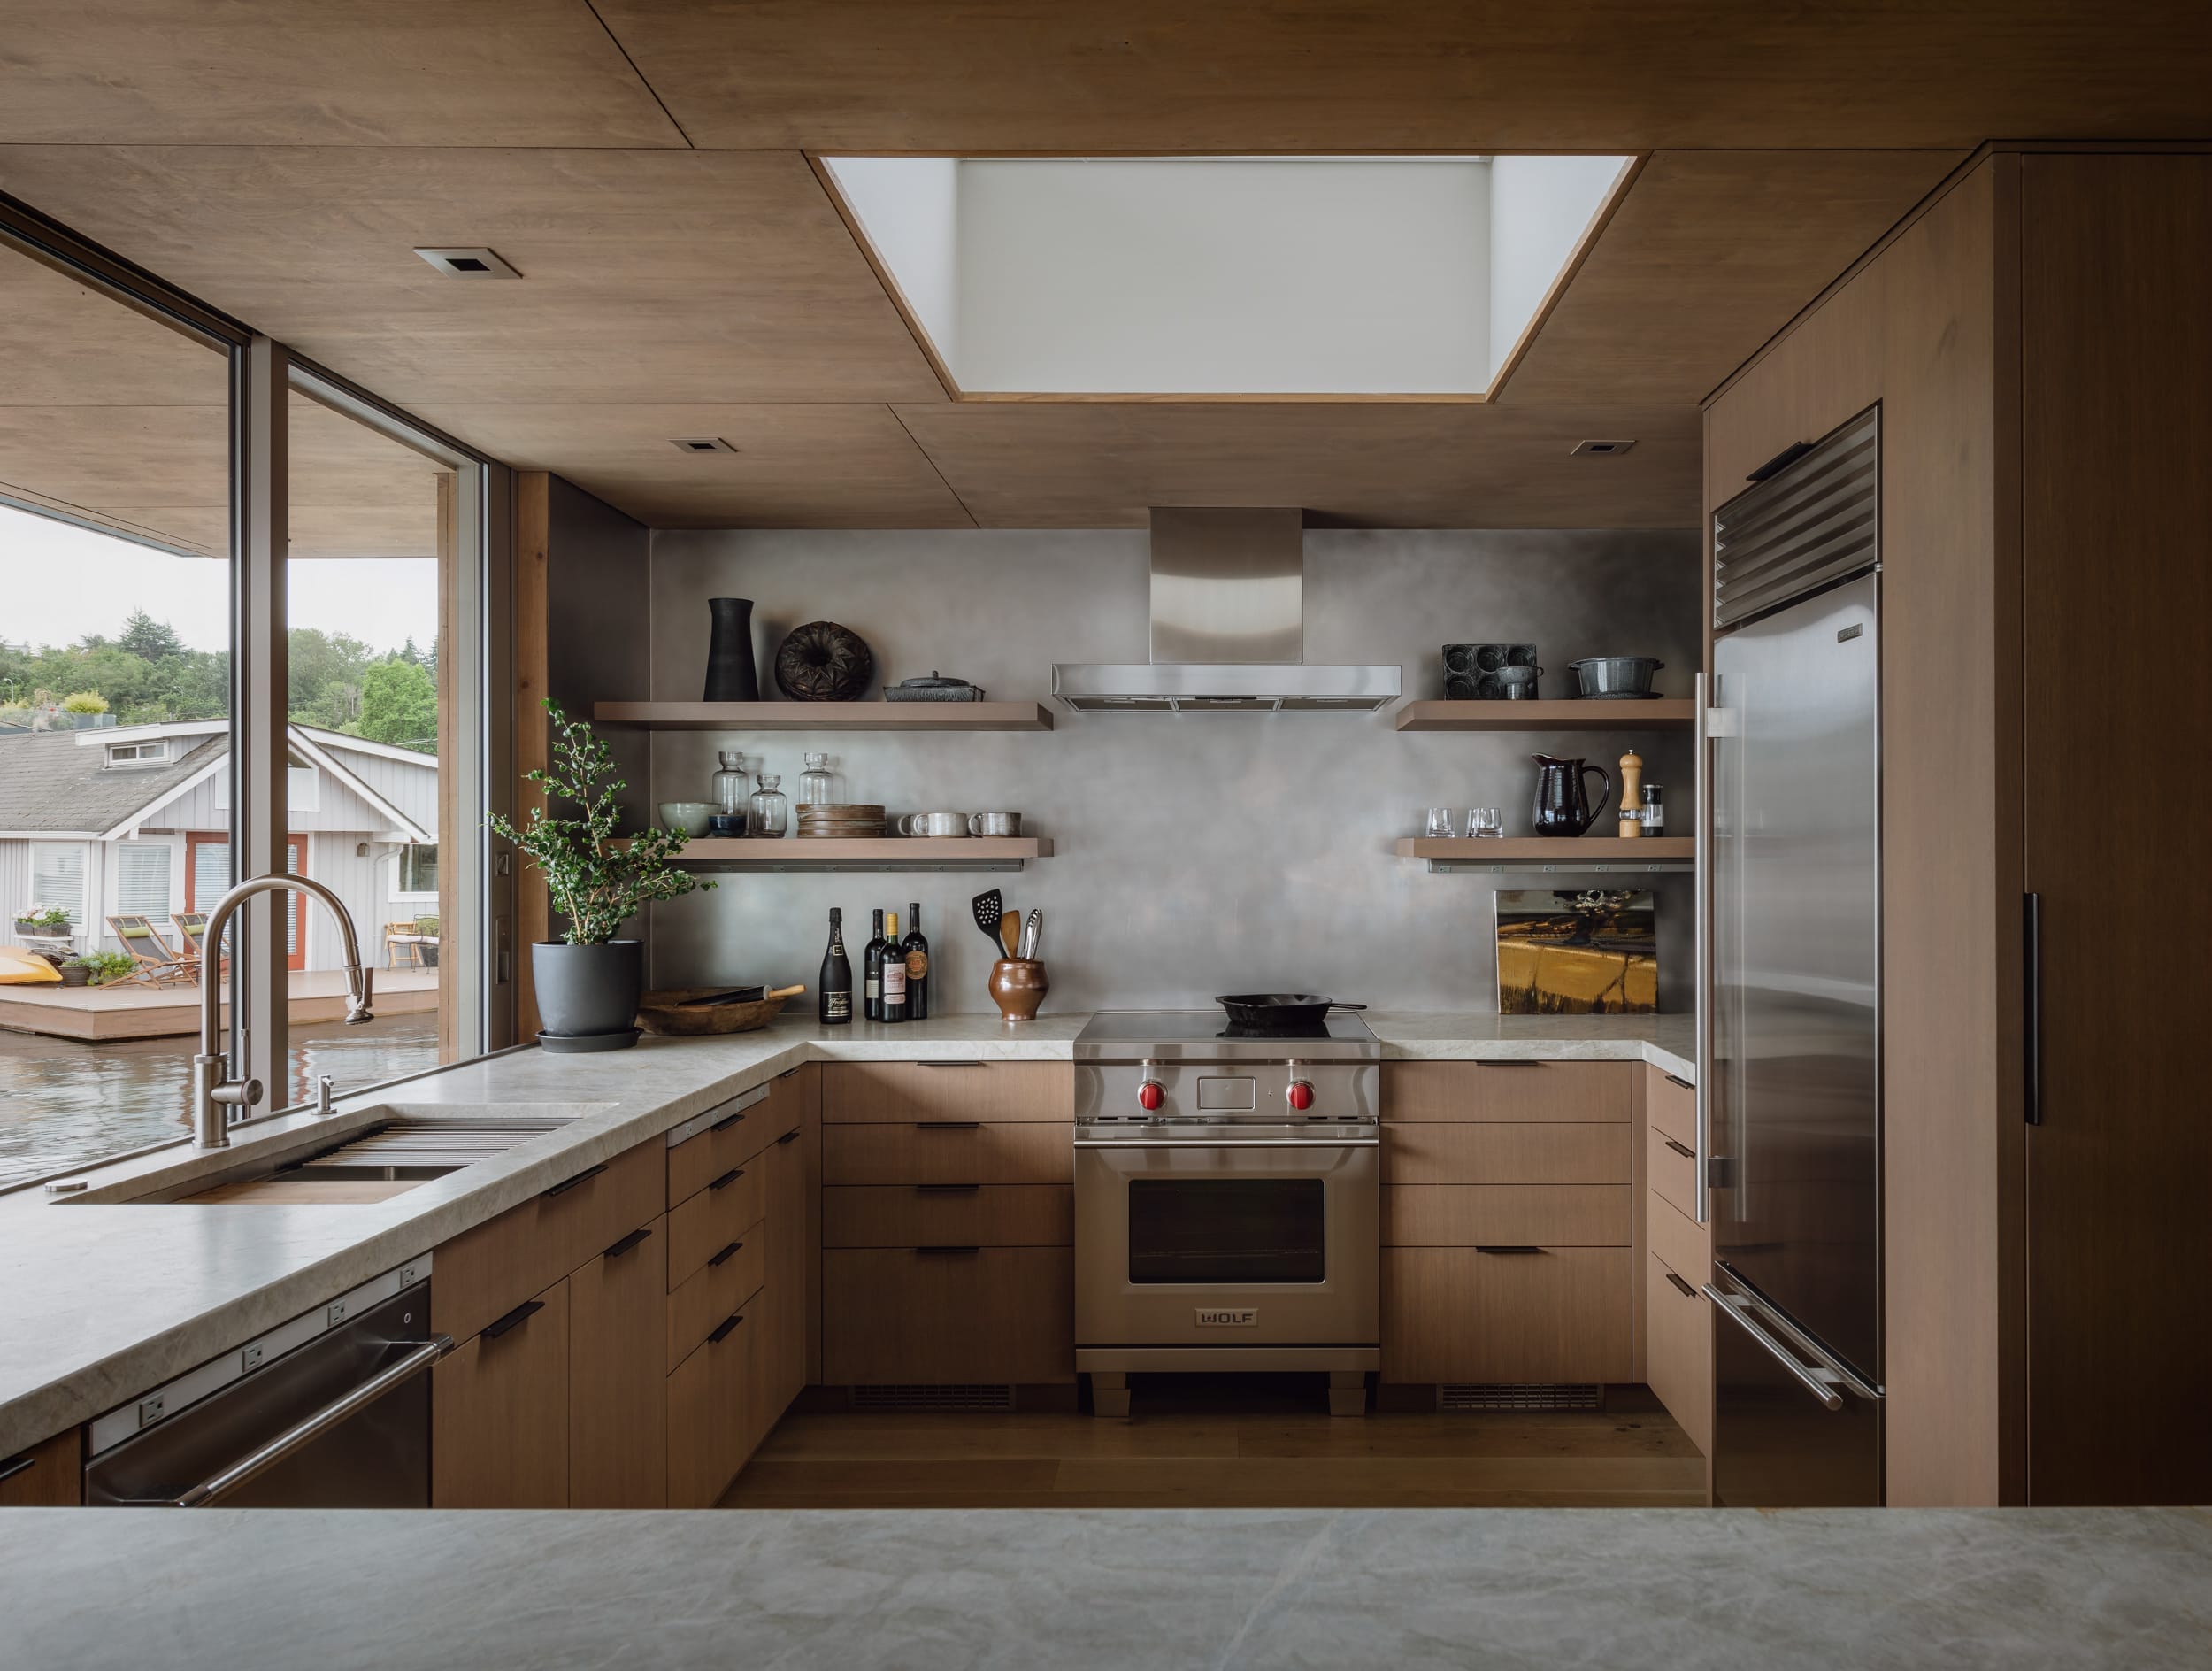 A modern kitchen with wooden cabinets and a skylight in a Modern Home.